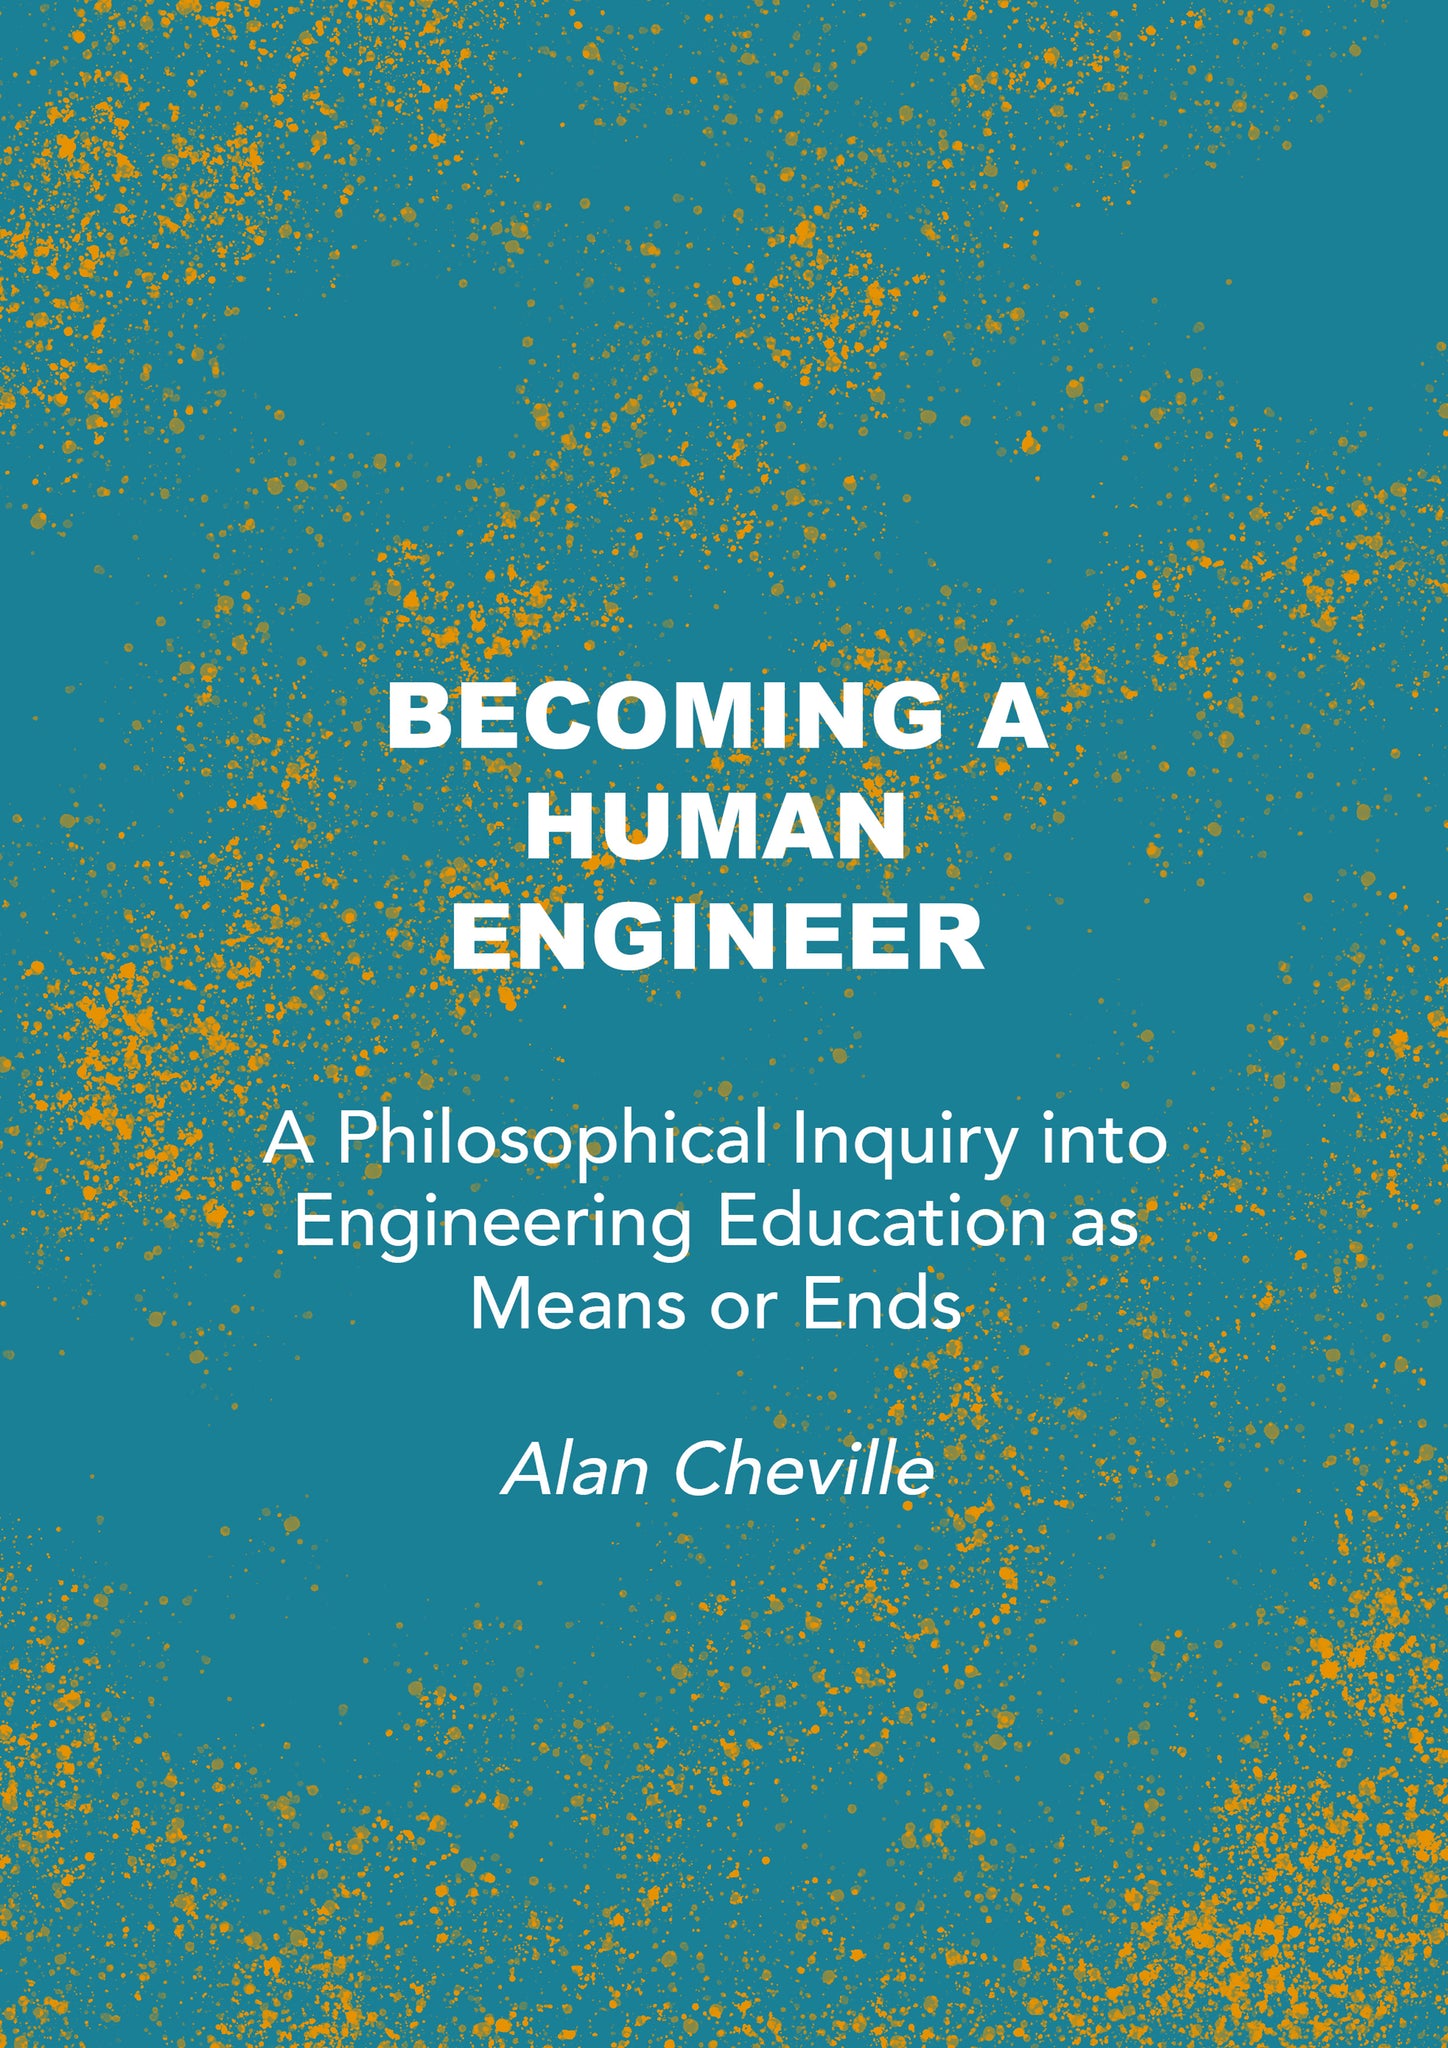 Becoming a Human Engineer: A Philosophical Inquiry into Engineering Education as Means or Ends